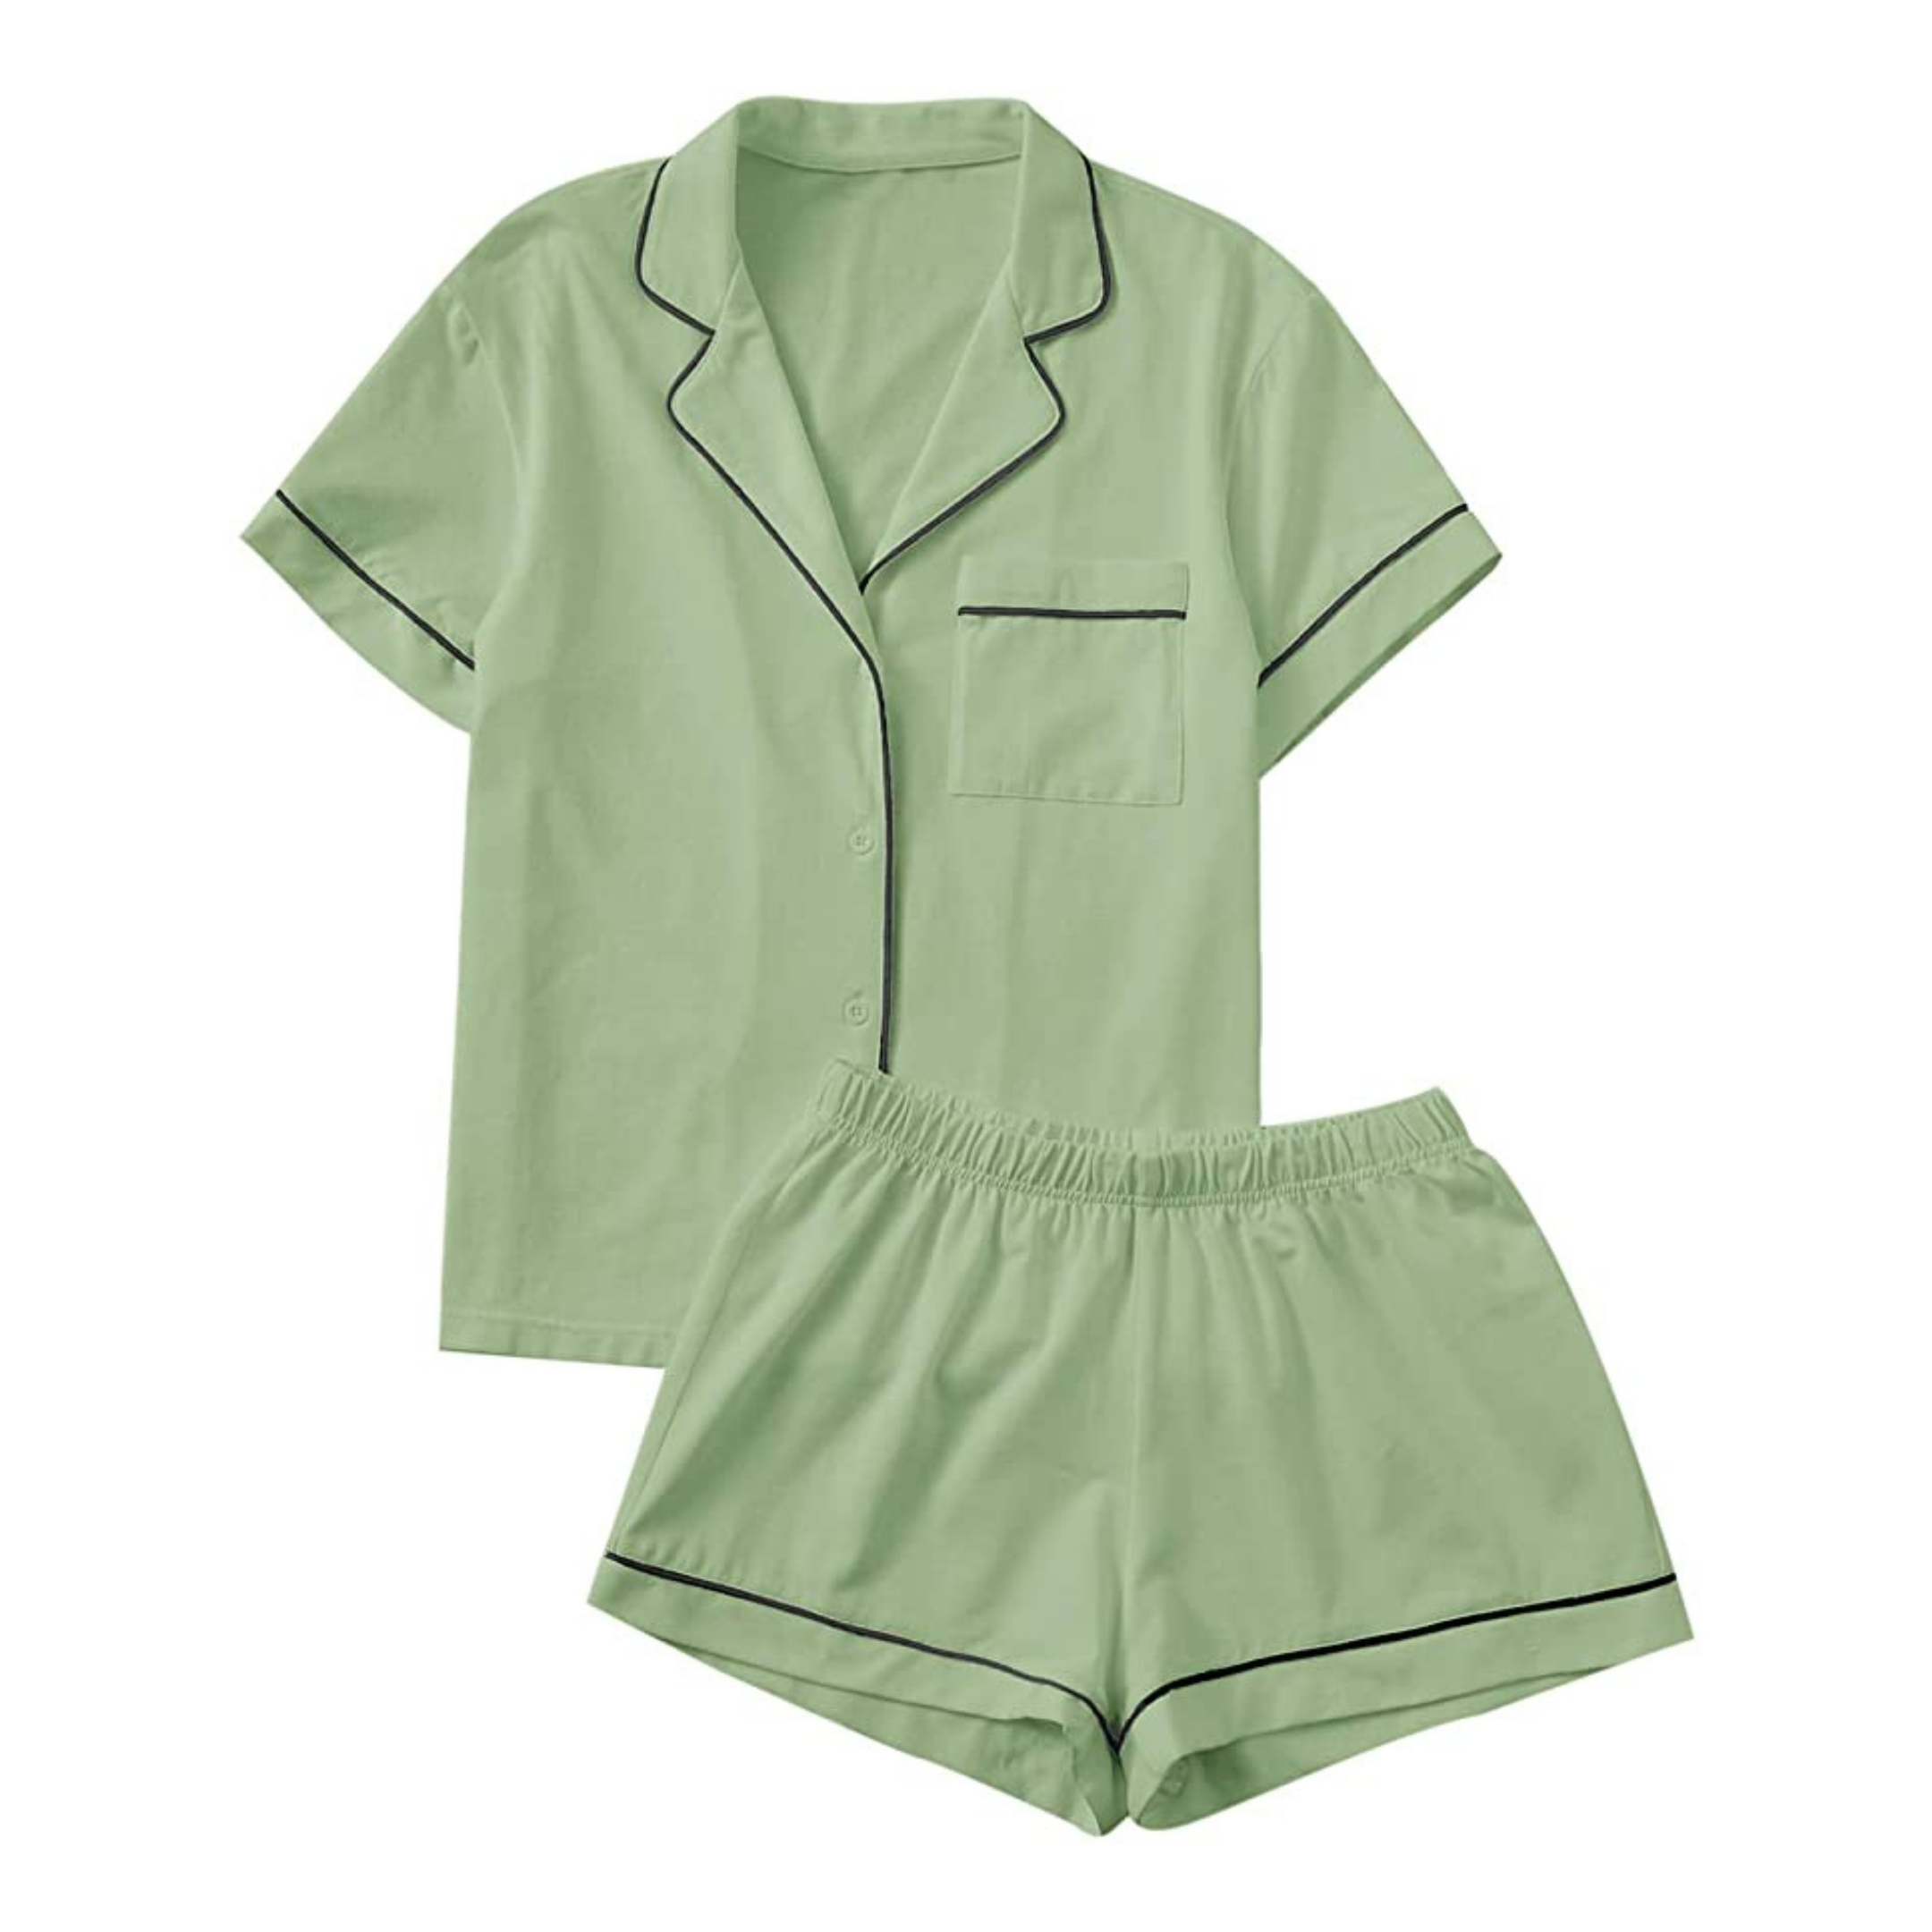 FACT: Amazon Has Some Of The Best Pajama Sets